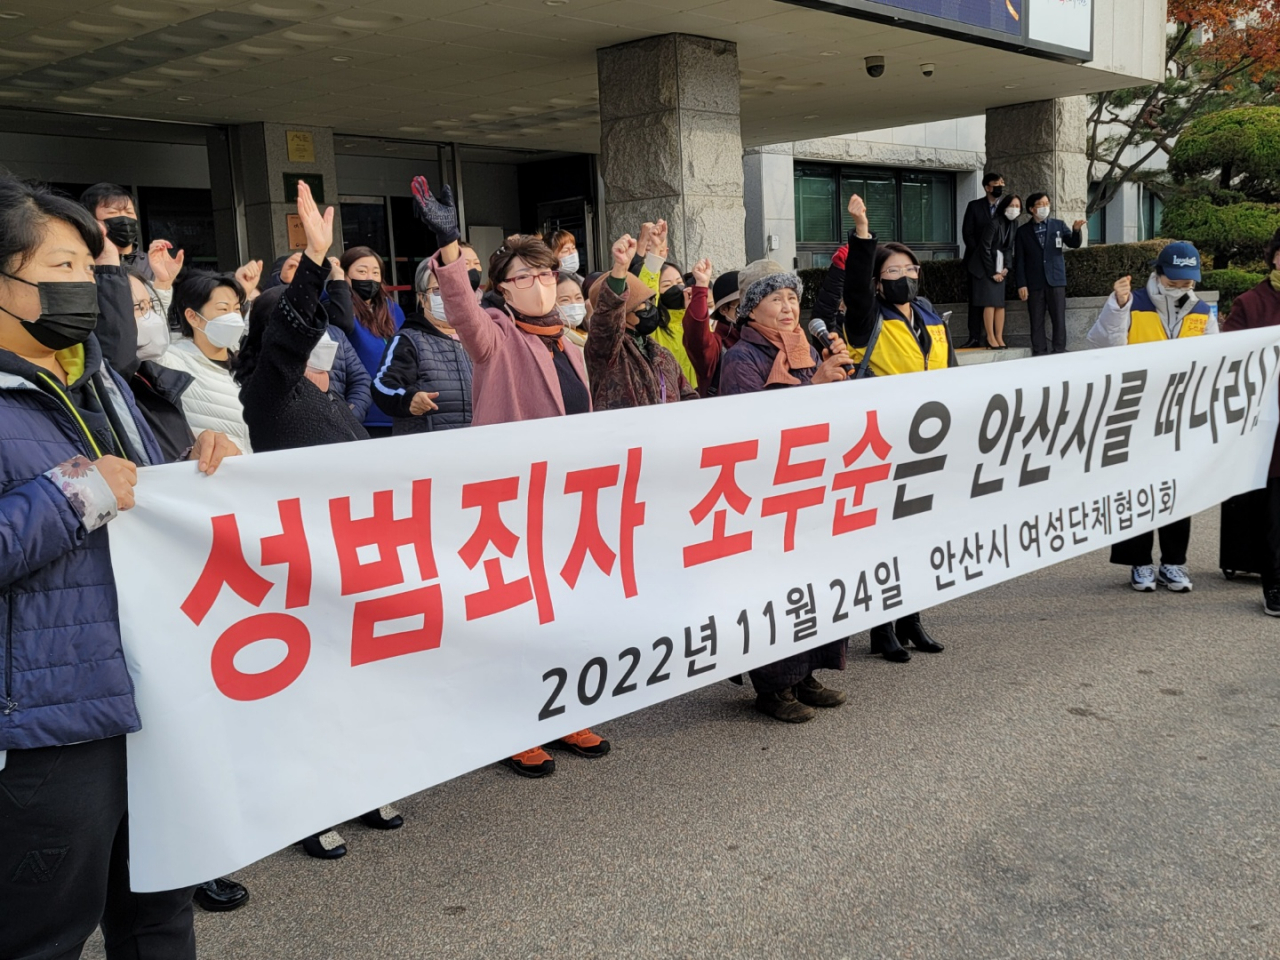 Women's rights groups and residents of Seonbu-dong, Ansan, Gyeonggi Province hold a press conference on Thursday in front of the Ansan City Hall, demanding that the convicted child rapist Cho Doo-soon should leave the city. (Yonhap)